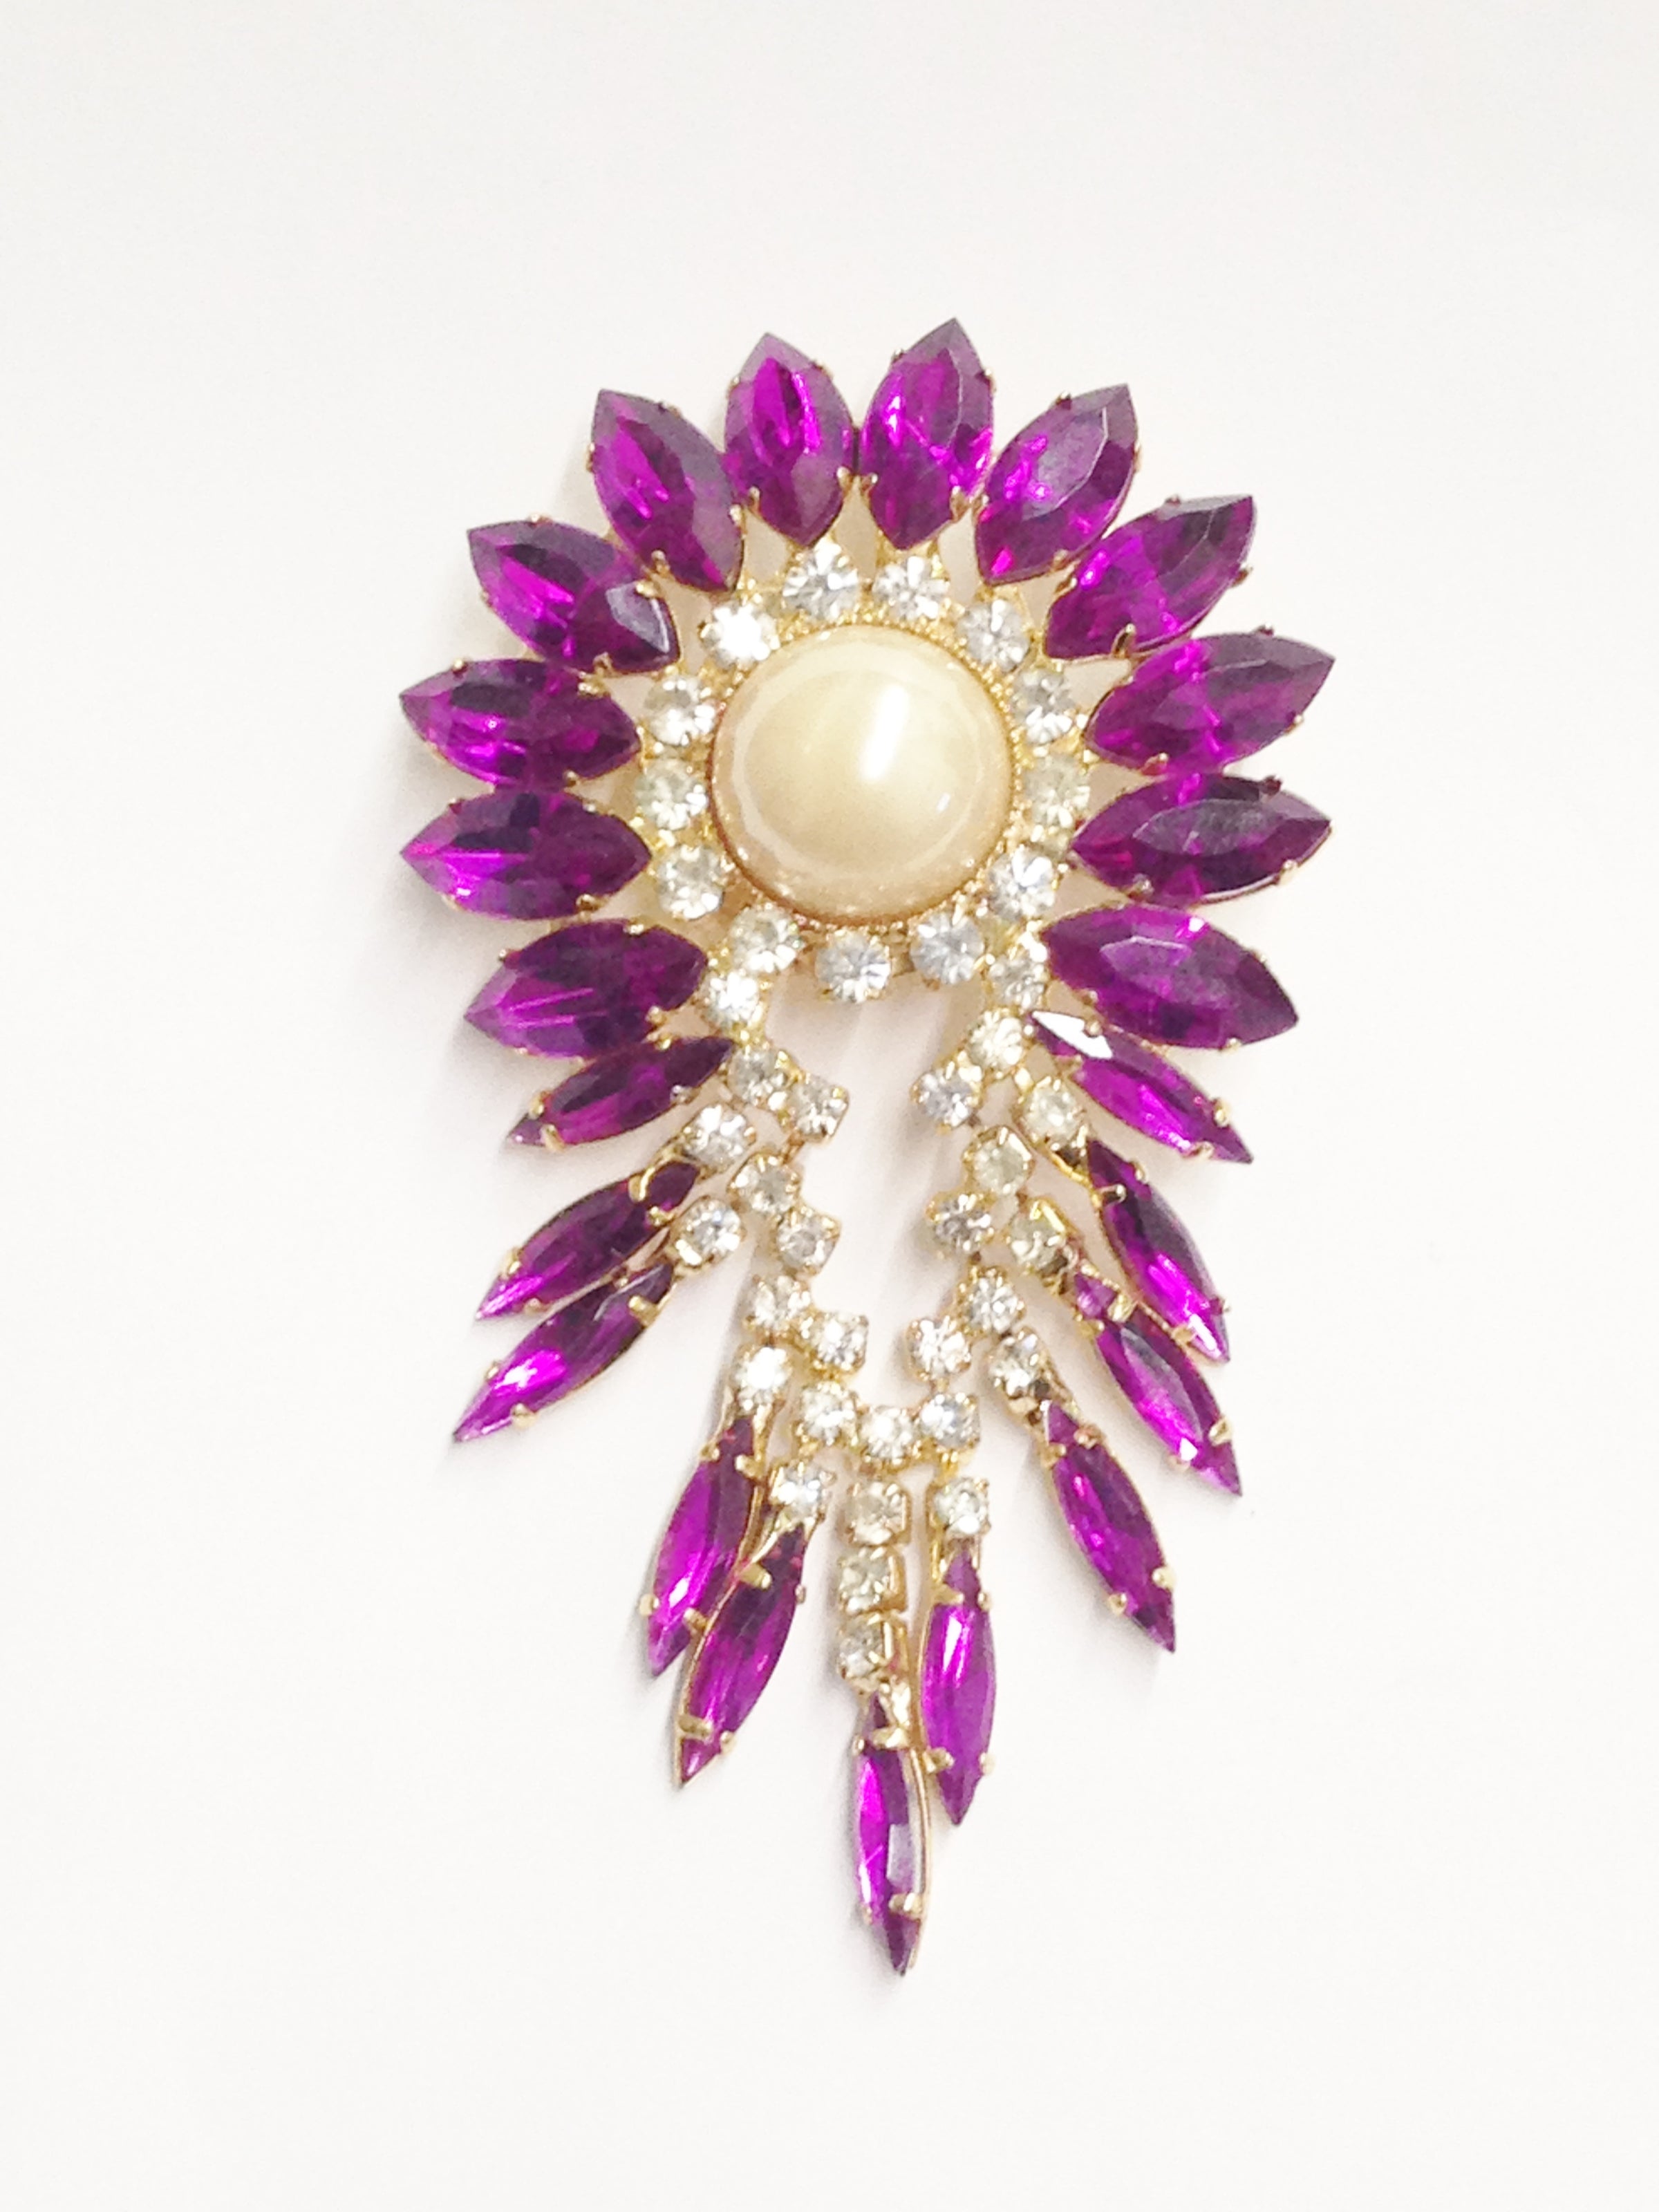 Dangling Purple Rhinestone Brooch Pin With Clear Rhinestones and Faux Pearl Center www.hersandhistreasures.com